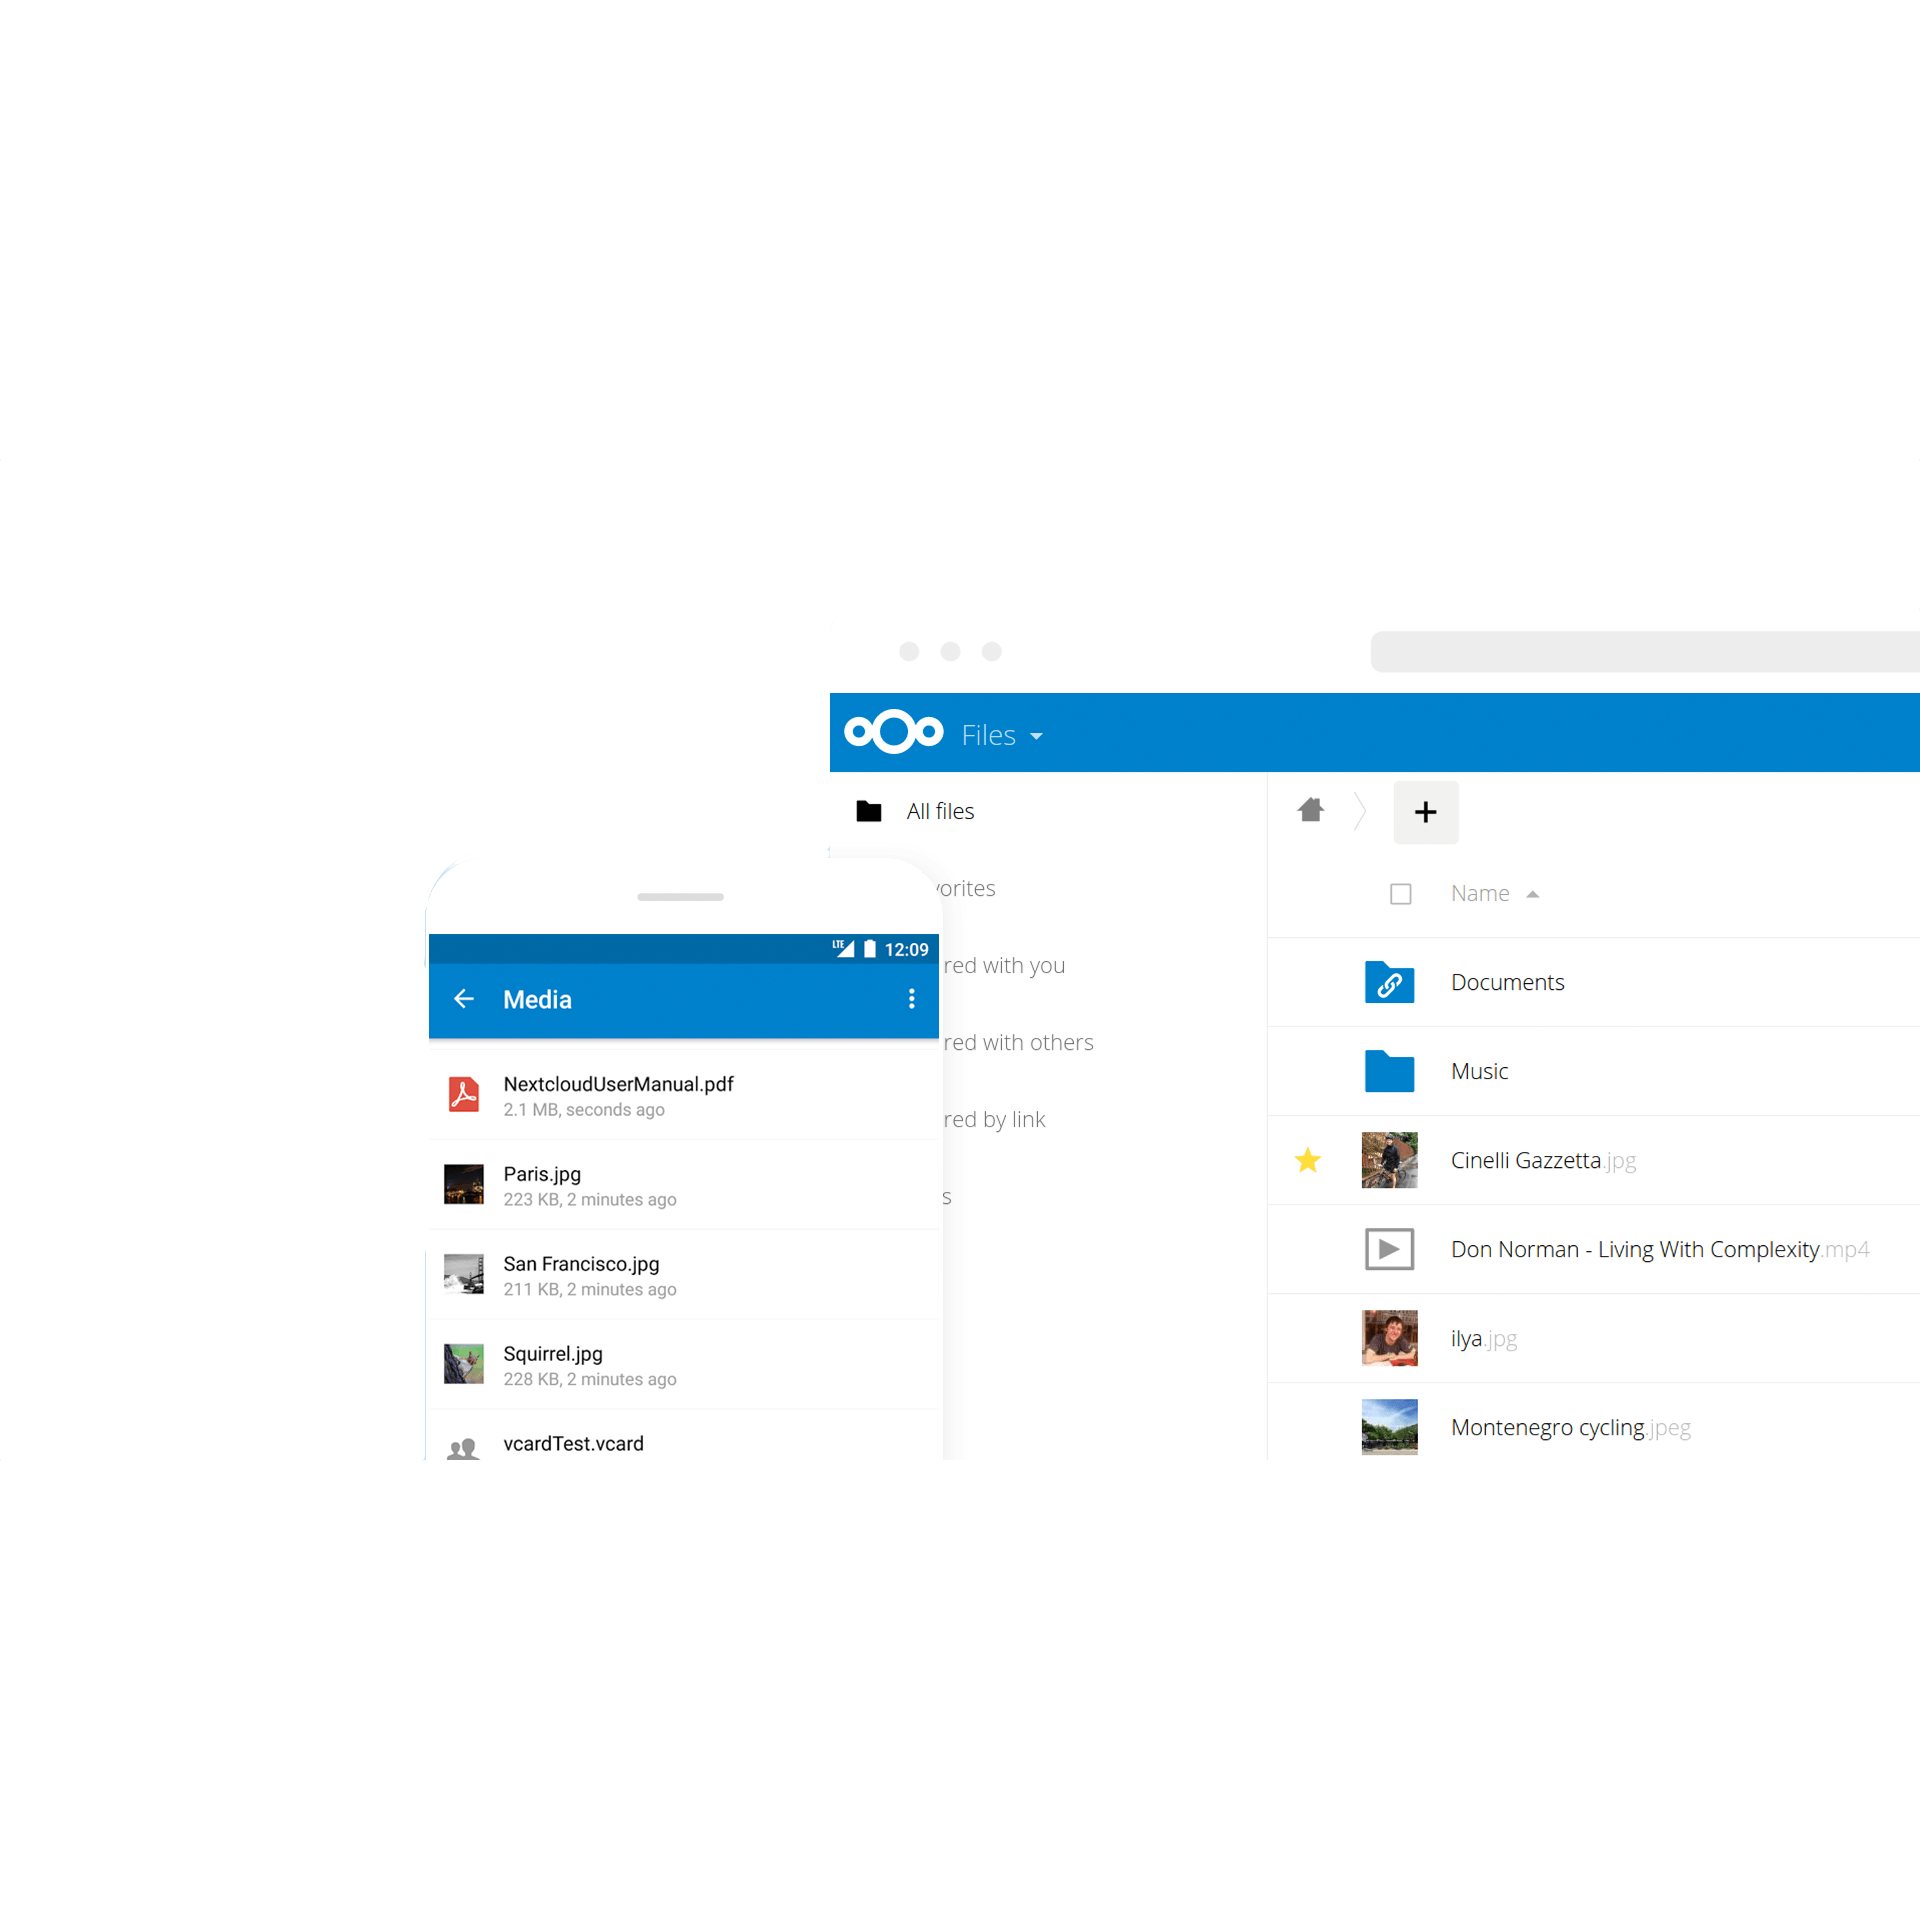 Nextcloud Hub provides the benefits of online collaboration without the compliance and security risks.